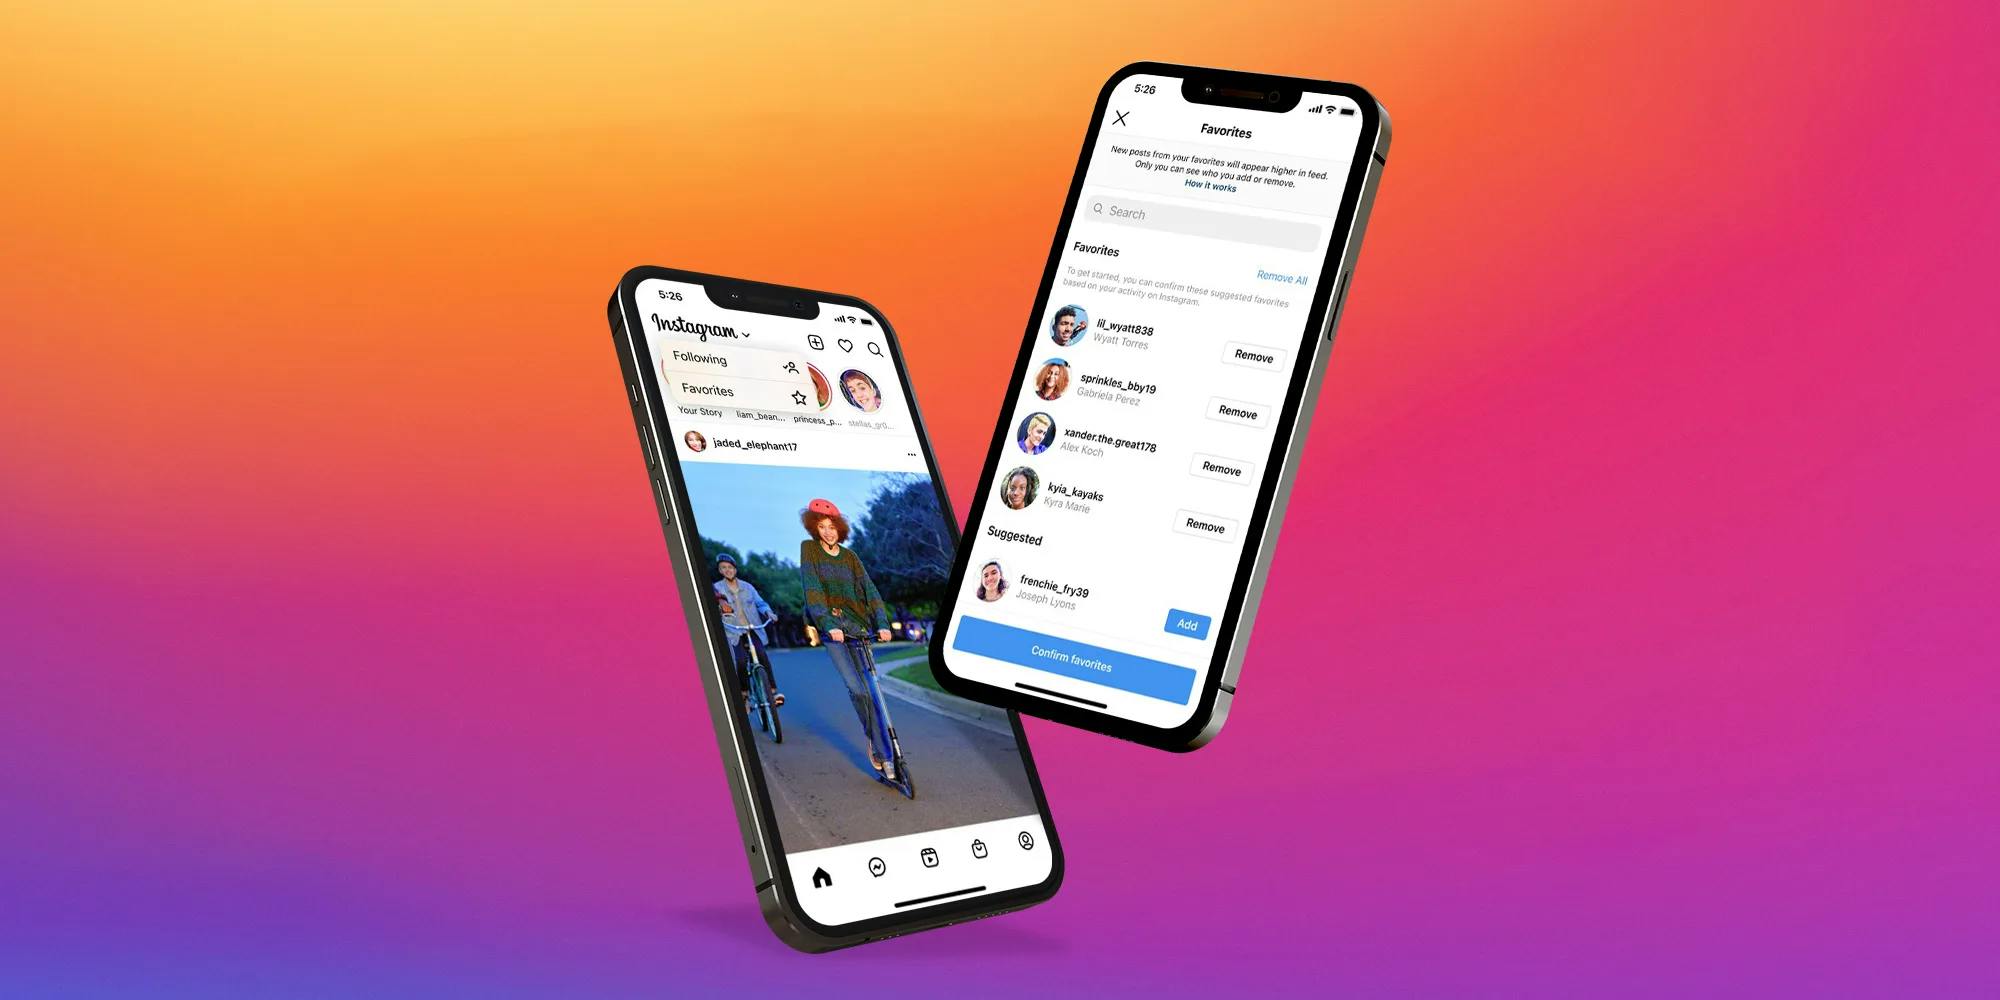 How to turn on chronological feed in Instagram?